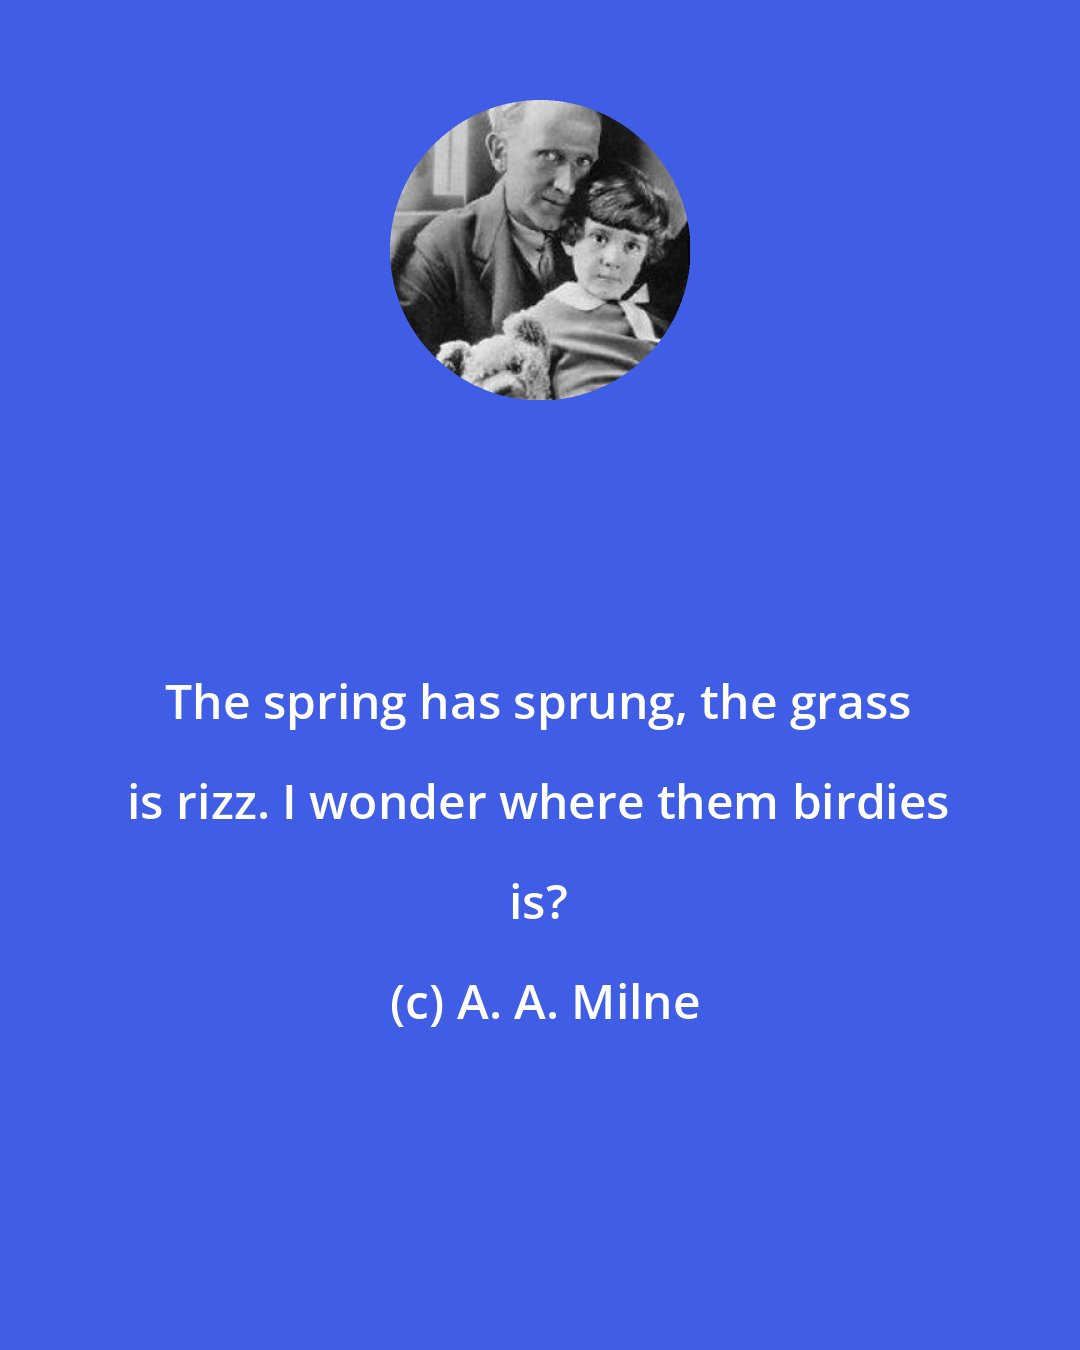 A. A. Milne: The spring has sprung, the grass is rizz. I wonder where them birdies is?